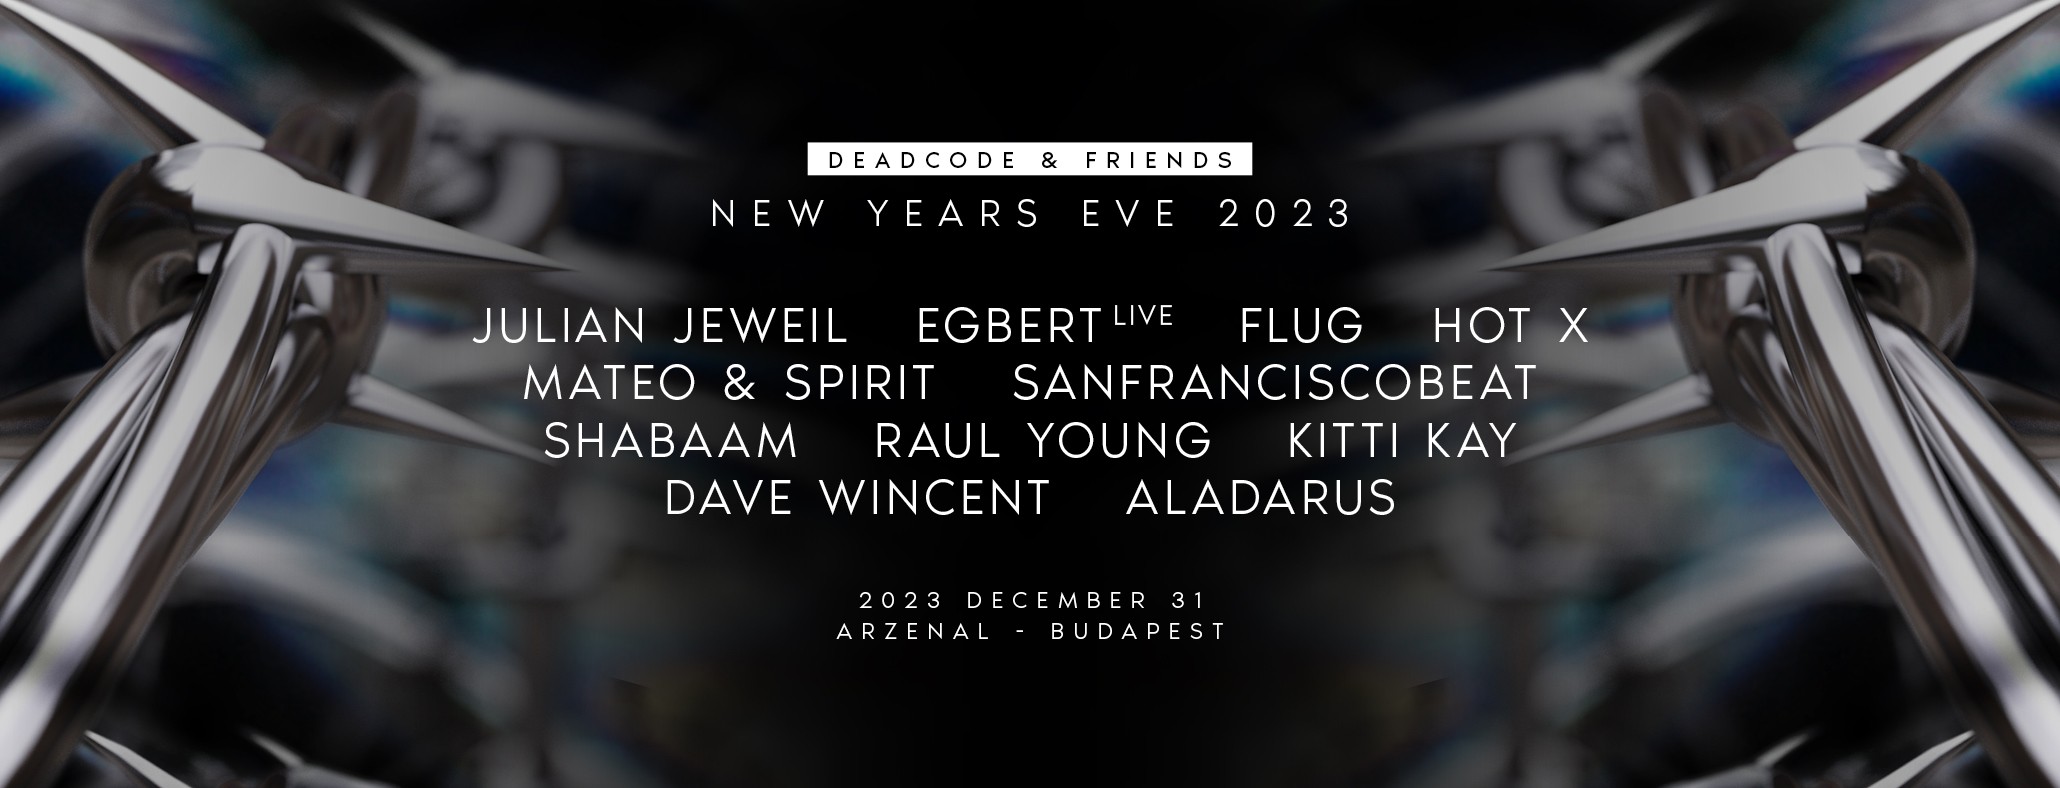 DEADCODE AND FRIENDS NYE 2023